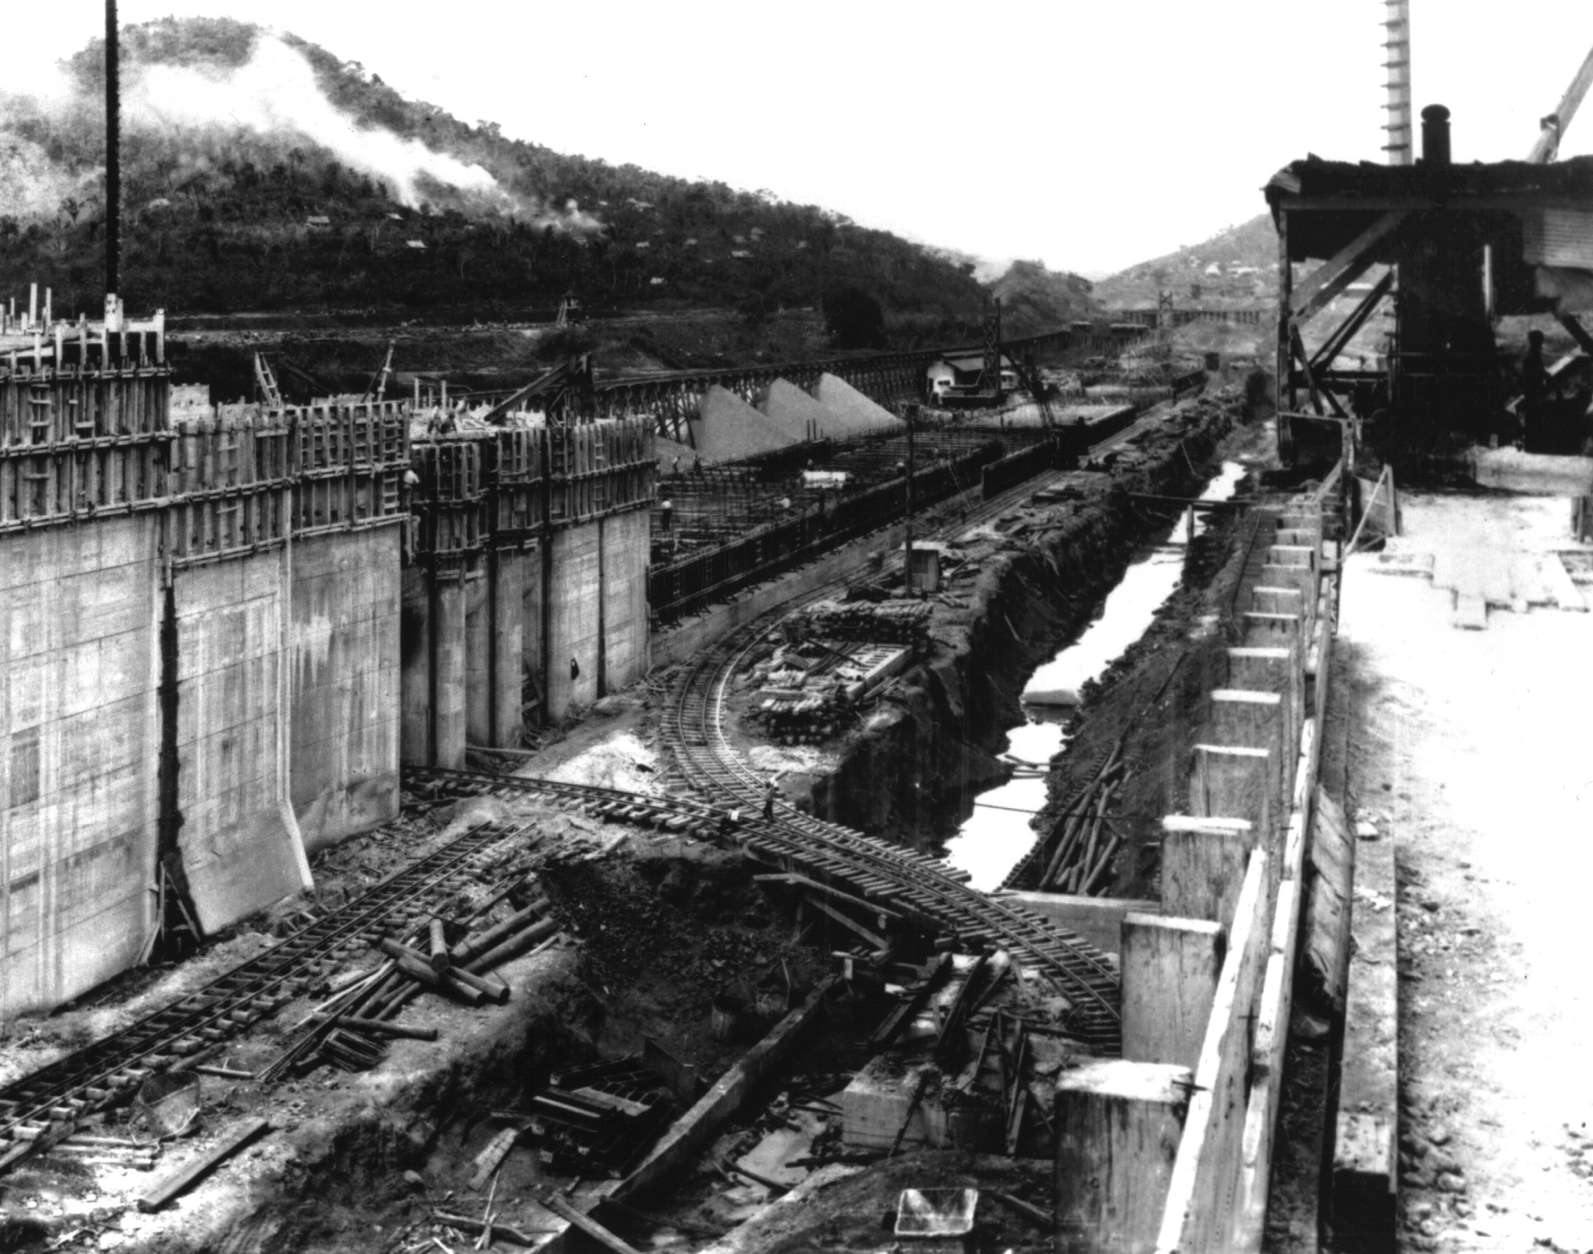 The Pedro Miguel Locks of the Panama Canal are pictured under construction in the Panama Canal Zone on June 9, 1912.  The 51-mile-long canal, which opened on Aug. 14, 1914, was comprised of six locks and became a short-cut for sea passage between North and South America.  At a cost of $352 million, the construction utilized some 40,000 workers under the direction of engineer George Washington Goethals. (AP Photo)